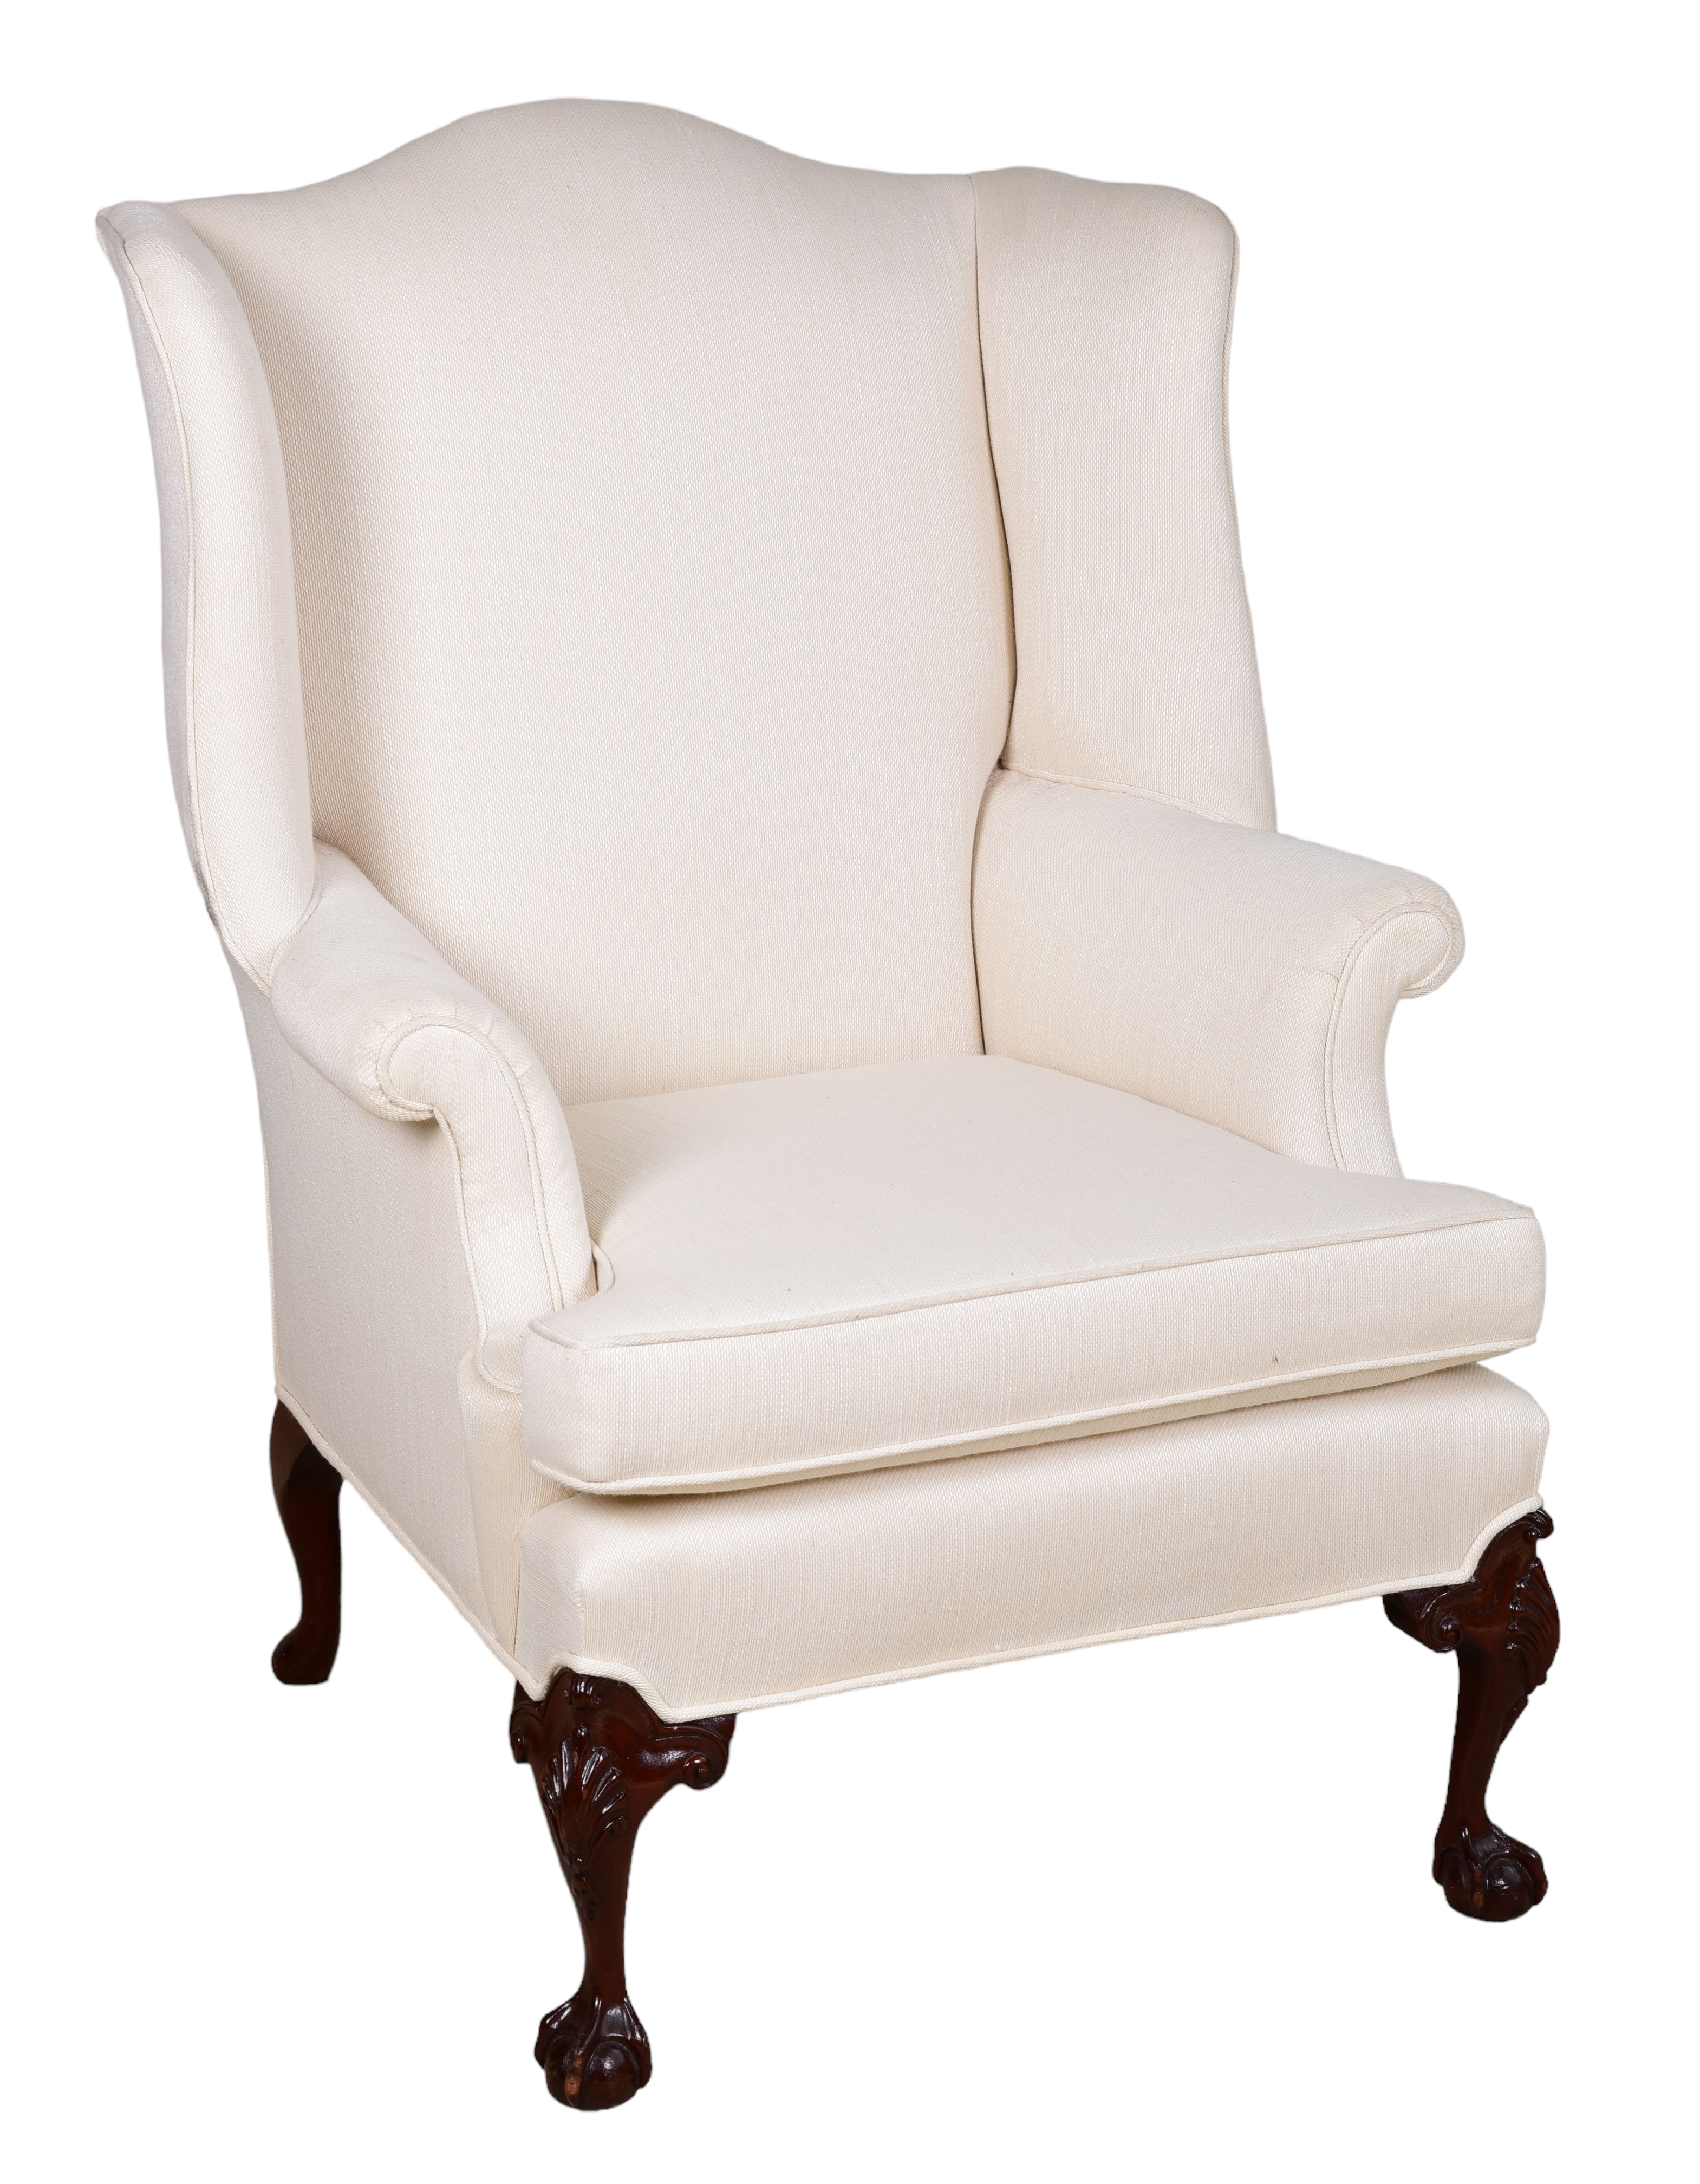 Chippendale style upholstered wing 3c668a